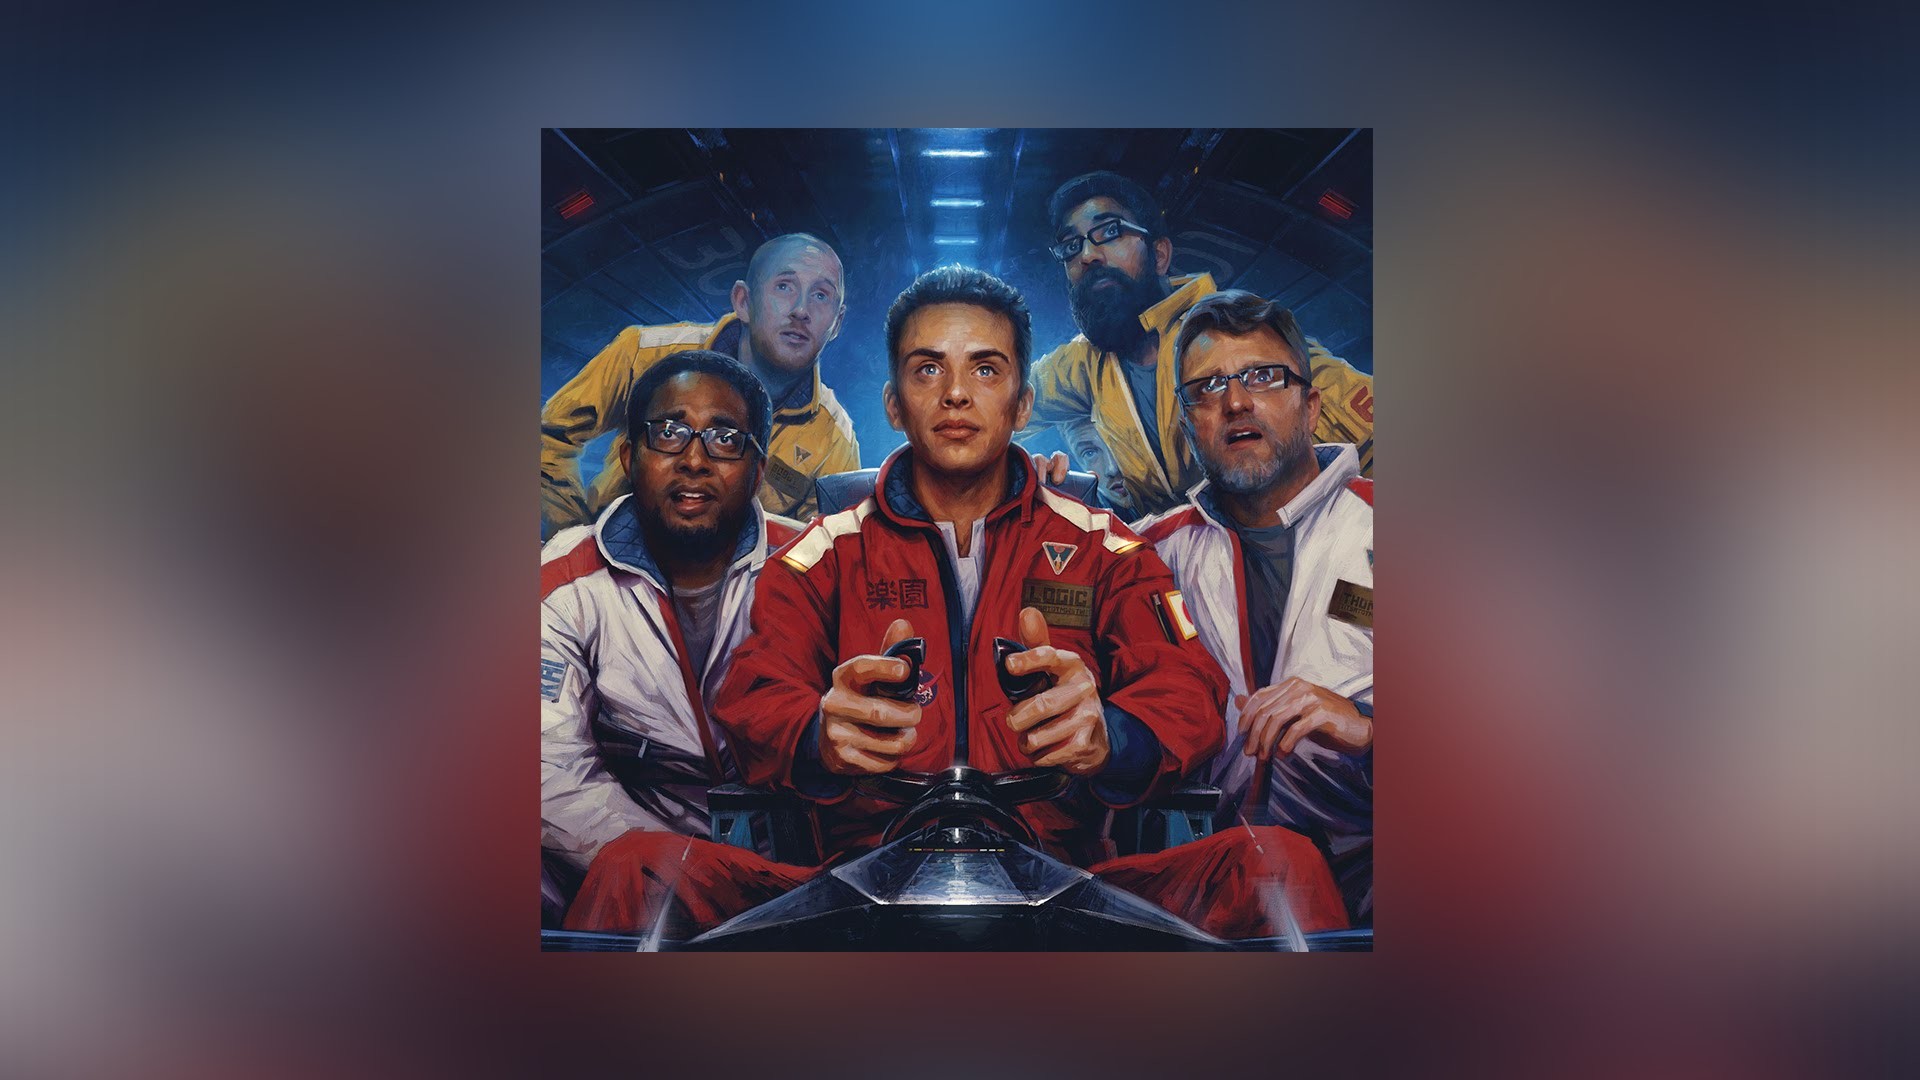 I've made a logic wallpaper featuring his mixtape and album covers .